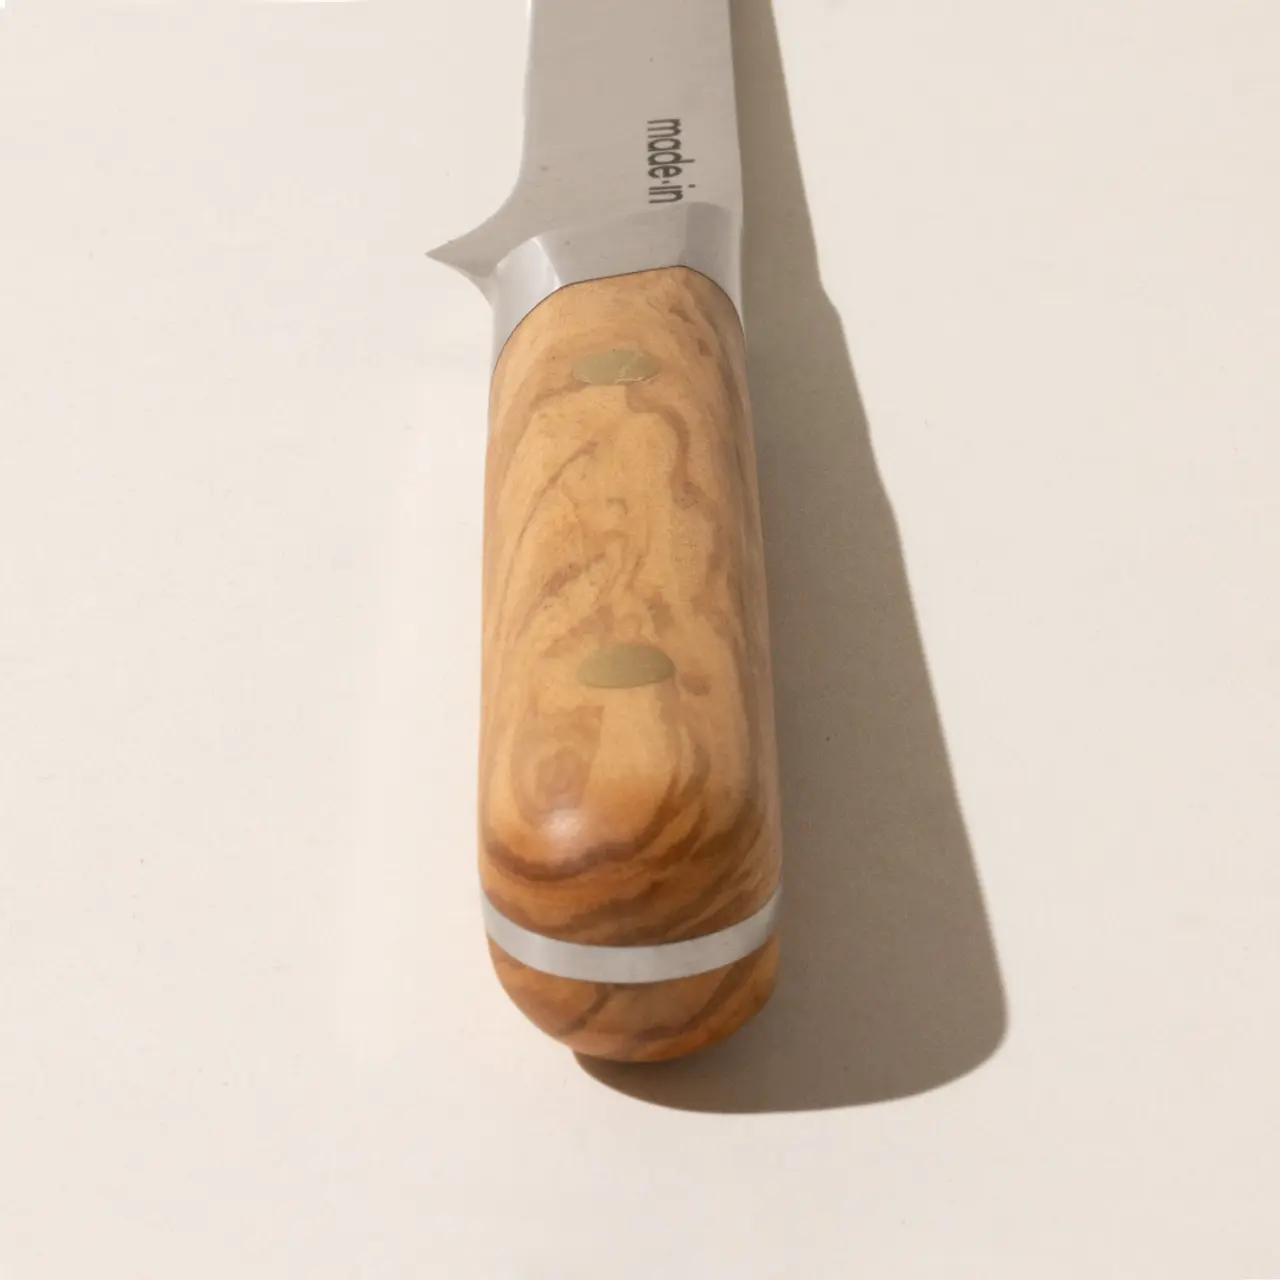 A stainless steel paring knife with a polished wooden handle lies on a light surface casting a slight shadow.